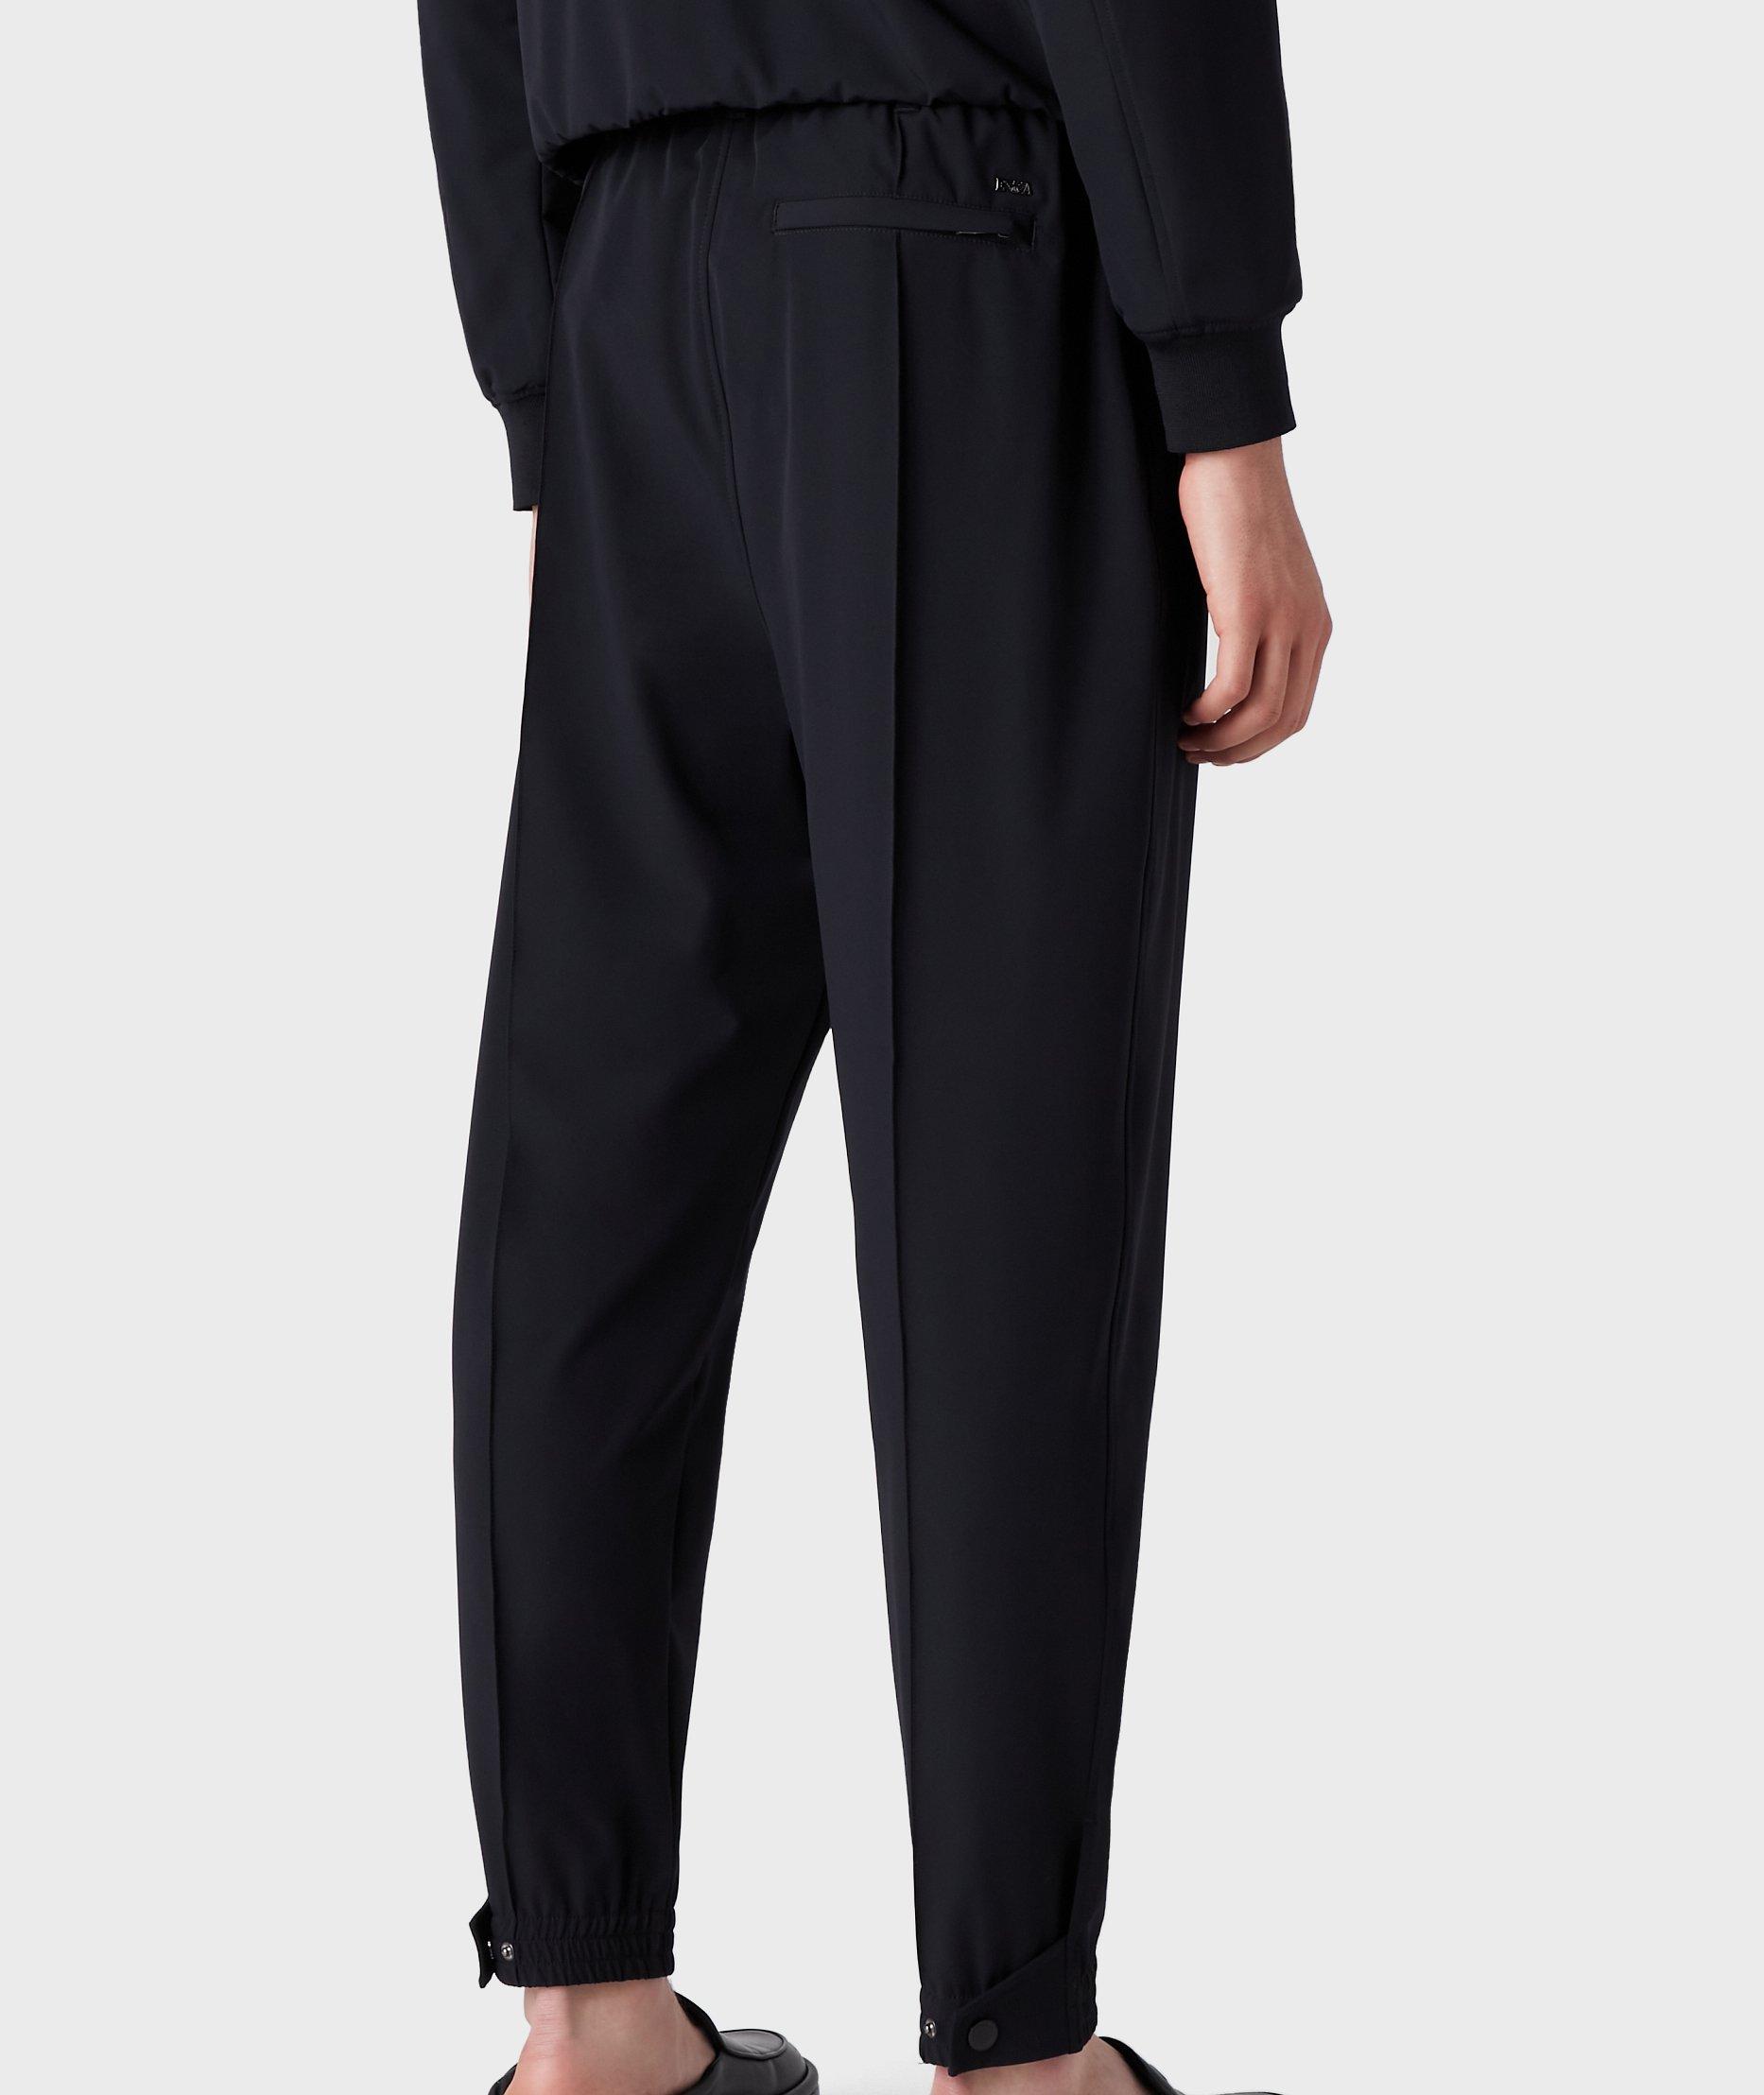 Emporio Armani Stretch Technical Trousers | Pants | Harry Rosen